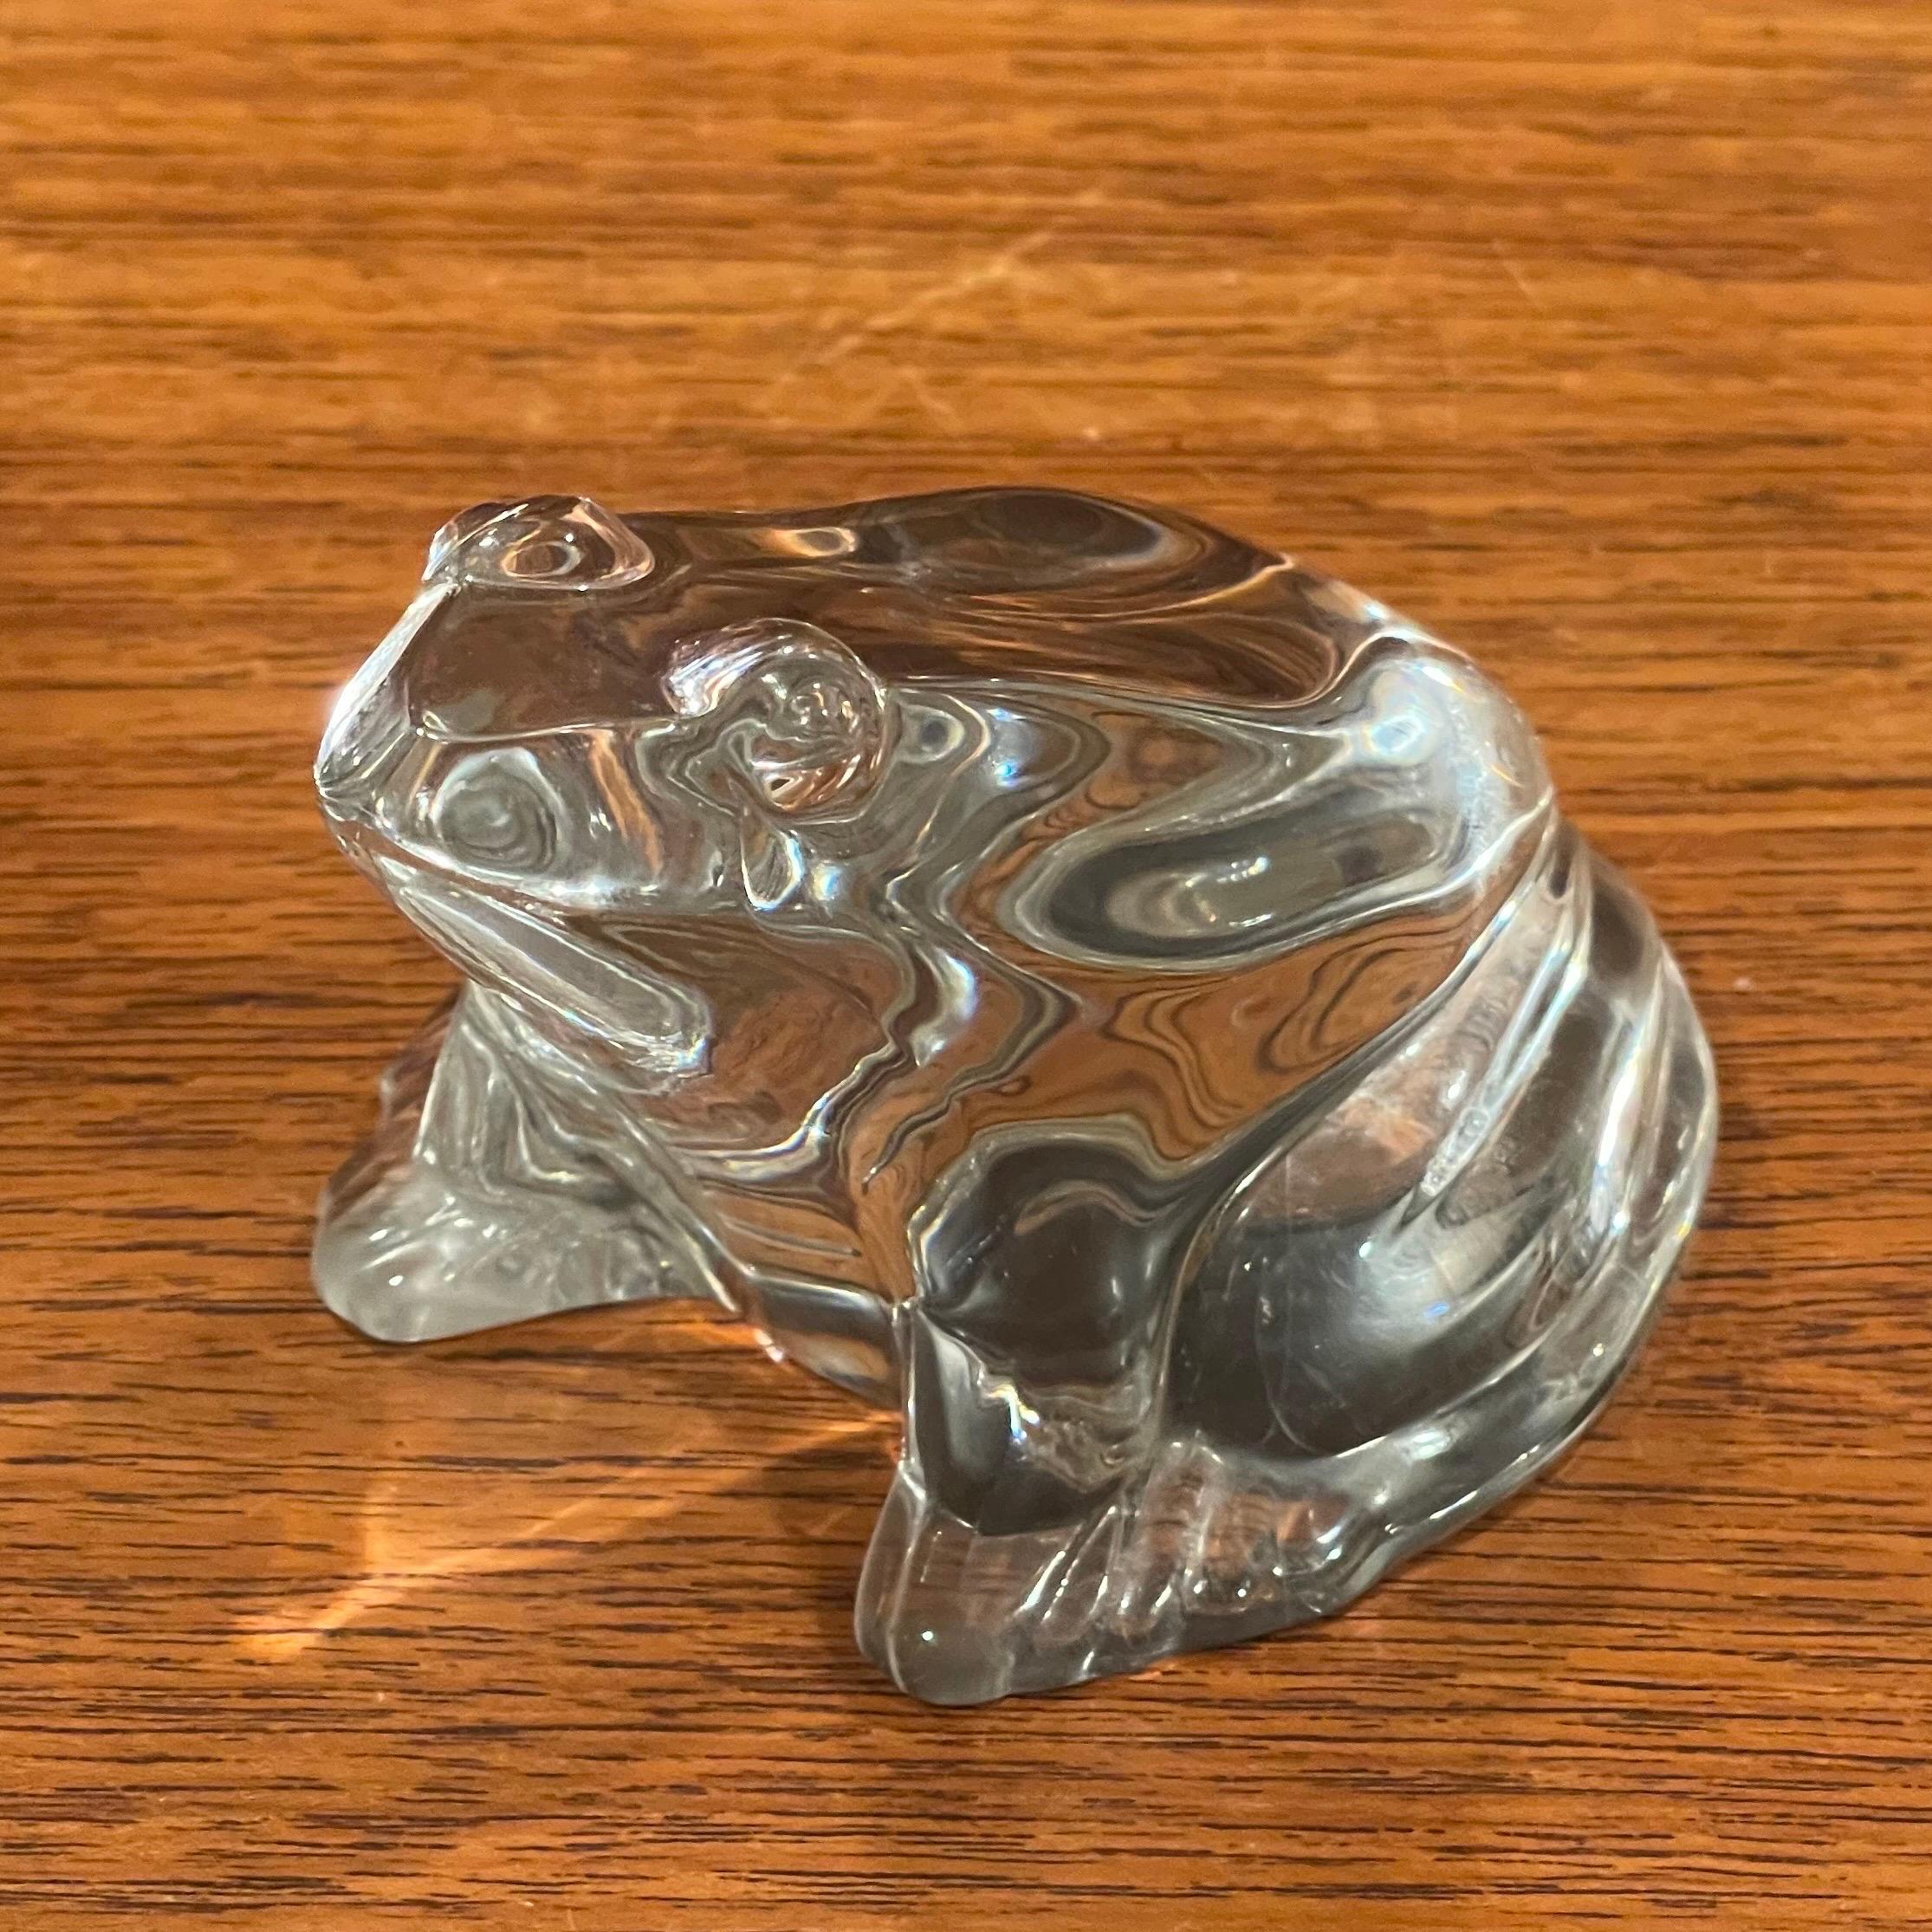 Stylized Frog Sculpture / Paperweight by Baccarat In Good Condition For Sale In San Diego, CA